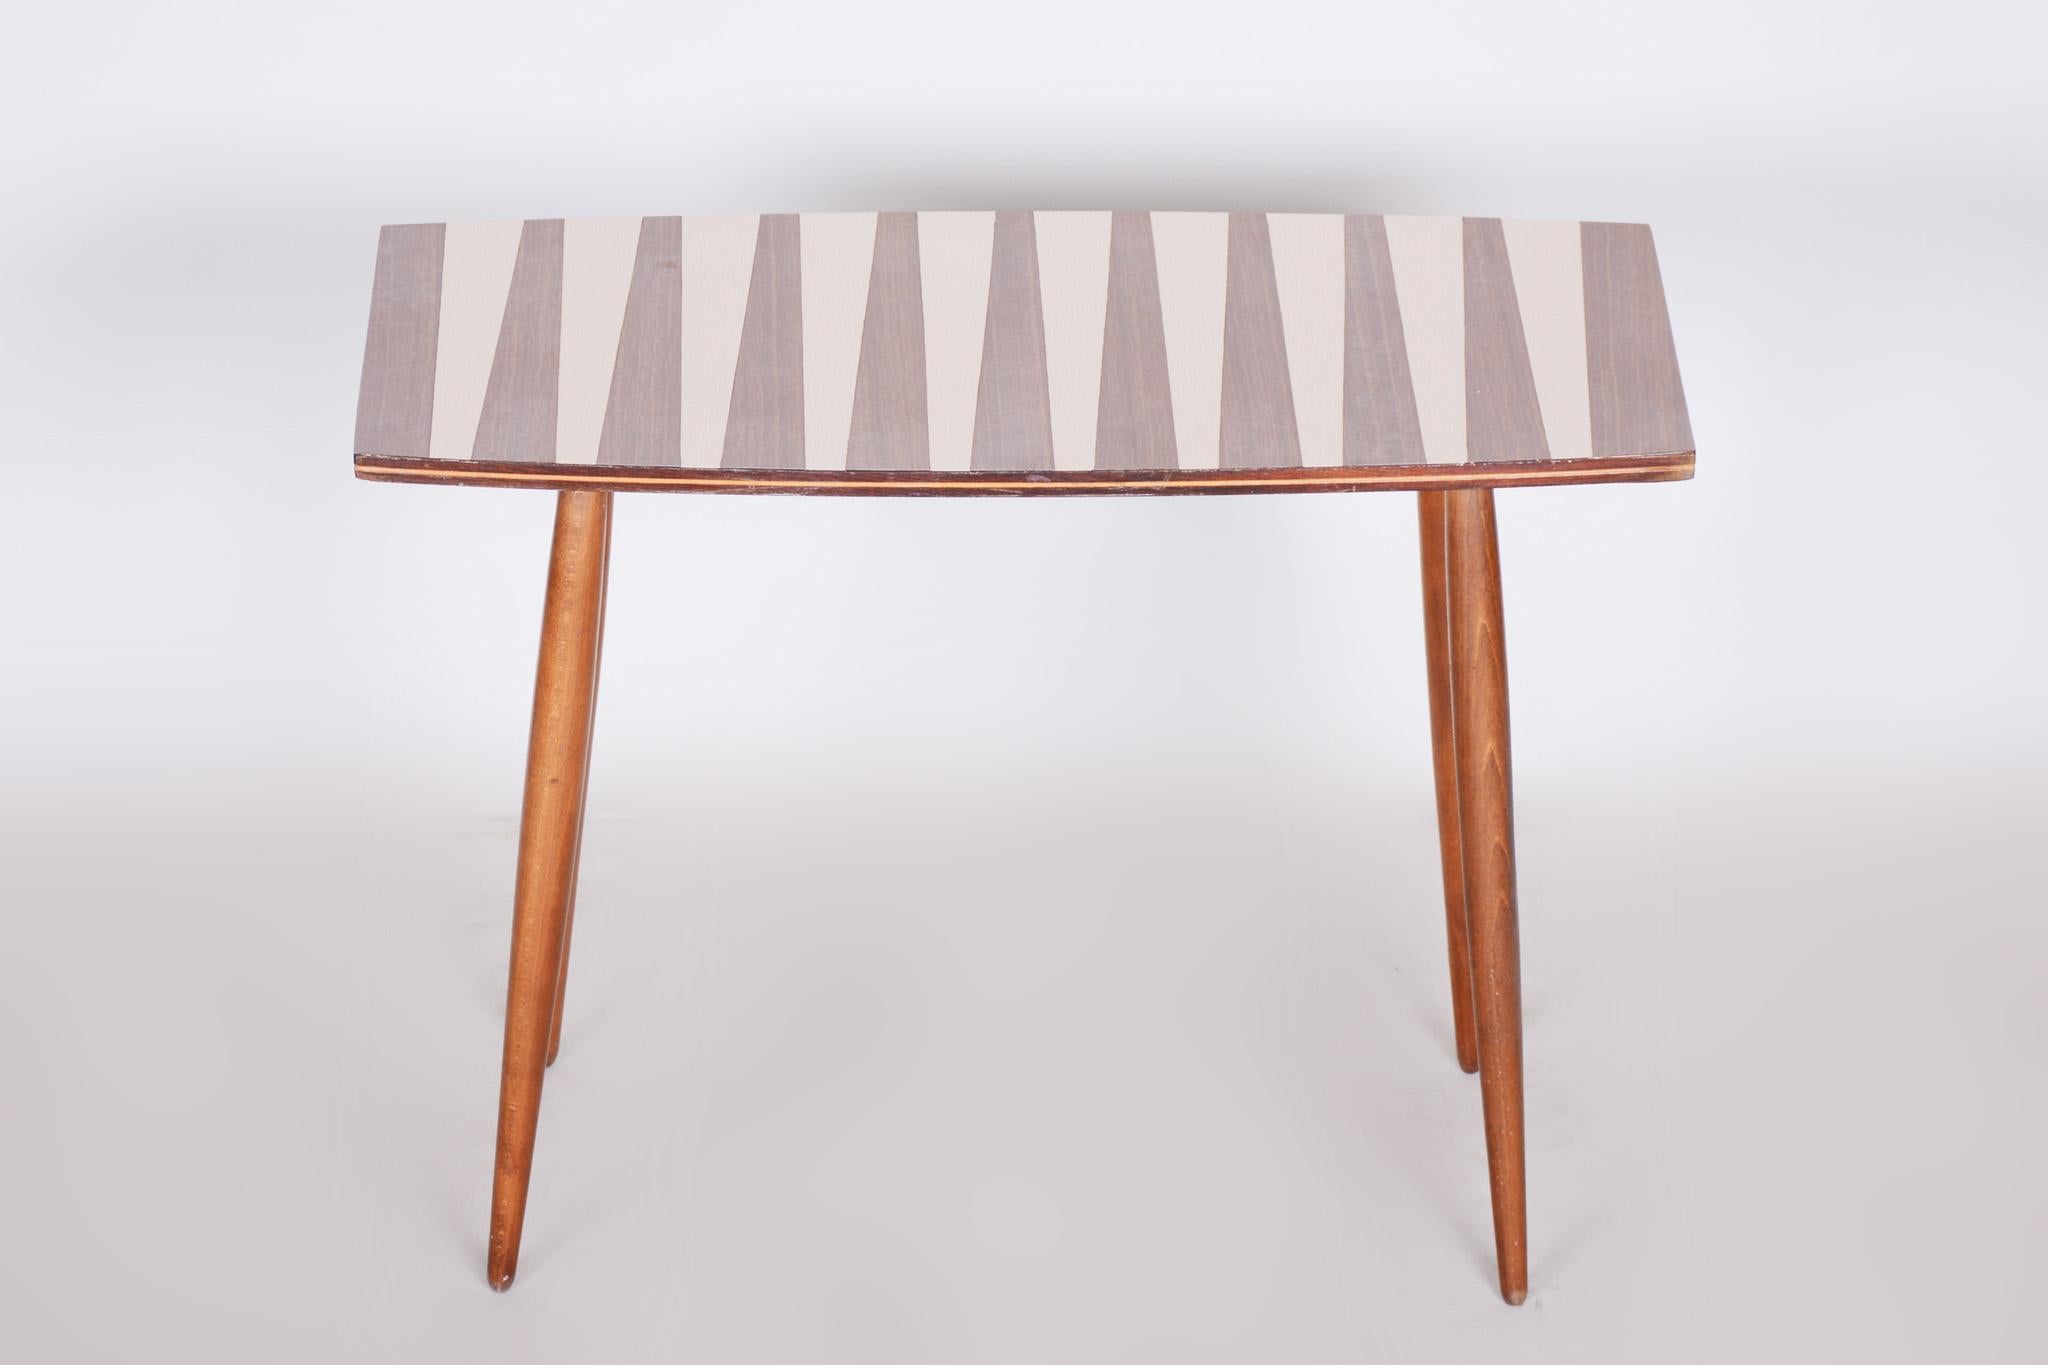 Beech Table, Czech Midcentury, Preserved in Original Condition, 1950s In Good Condition For Sale In Horomerice, CZ